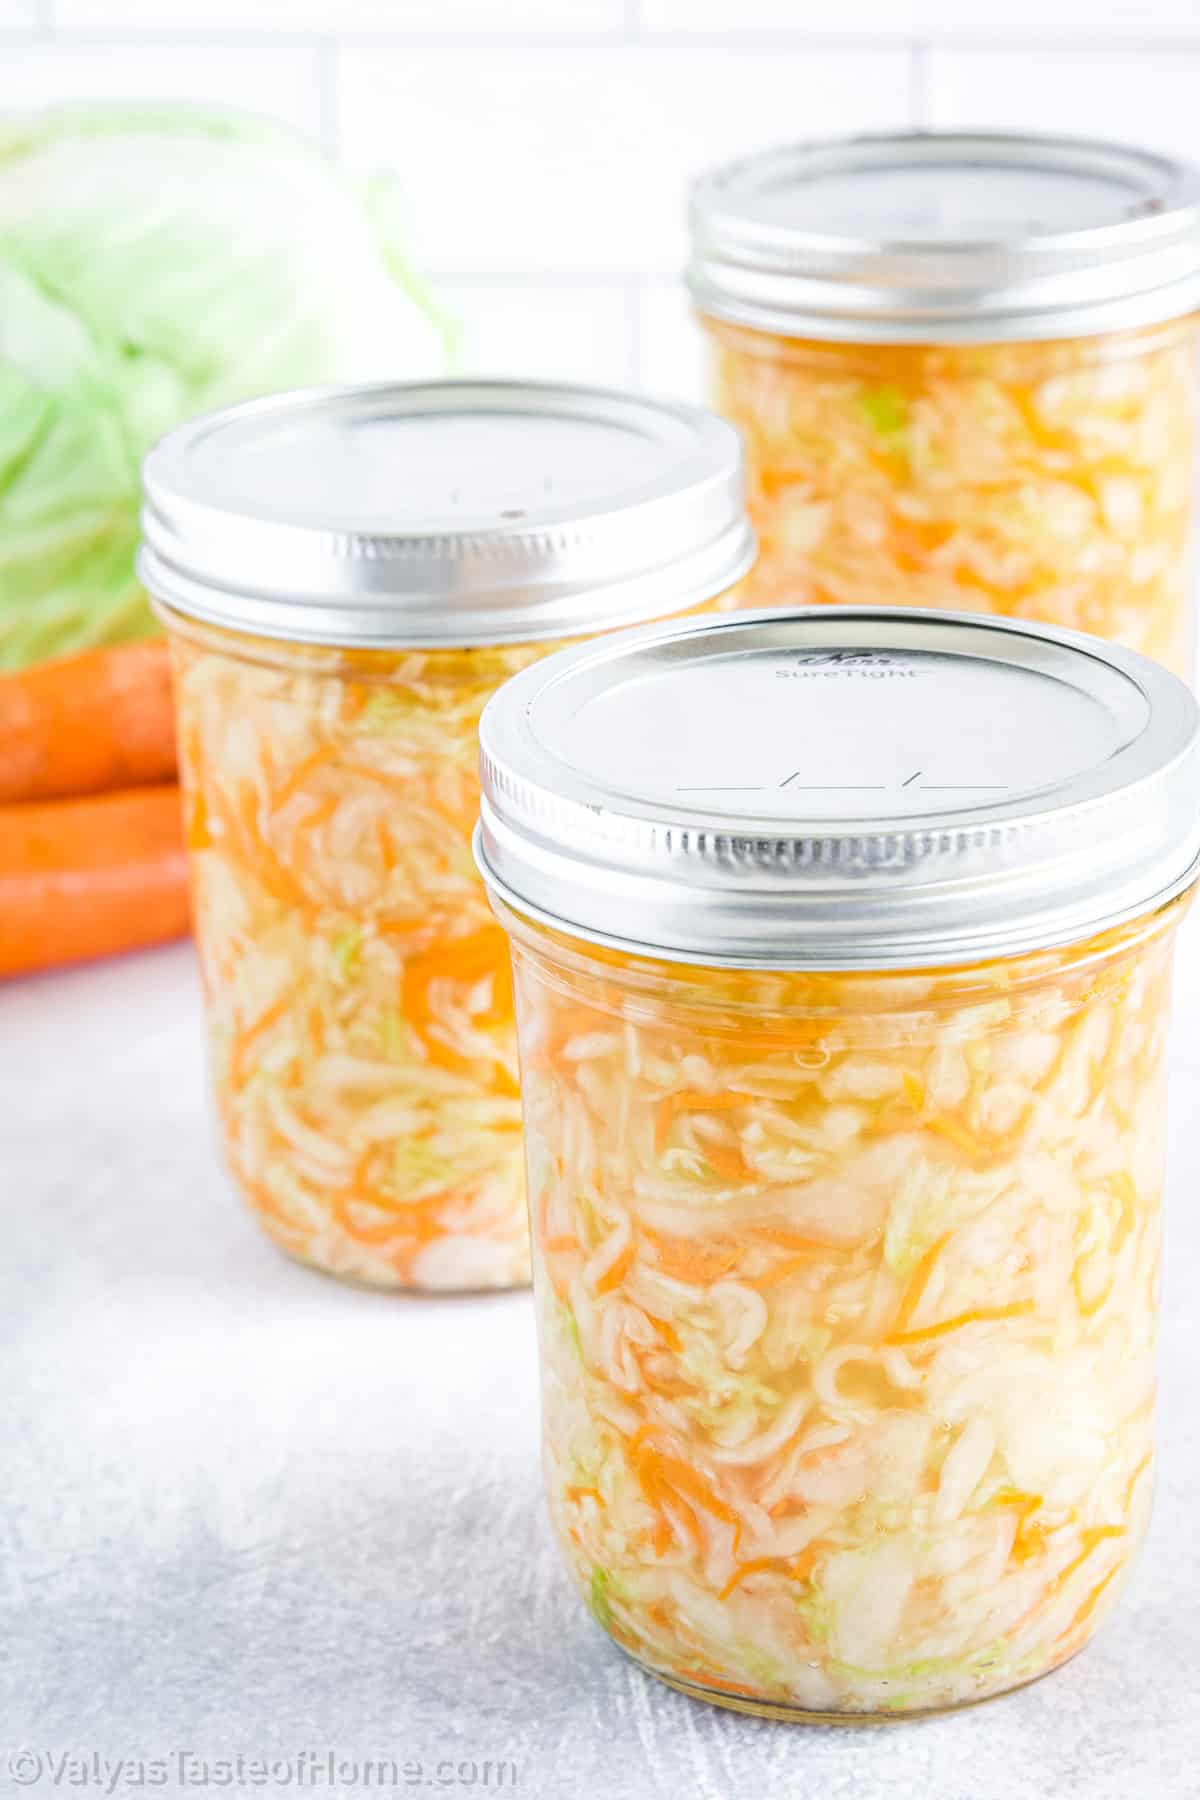 Your sauerkraut is safe to consume after just one week, but the flavor will continue to develop over several months.